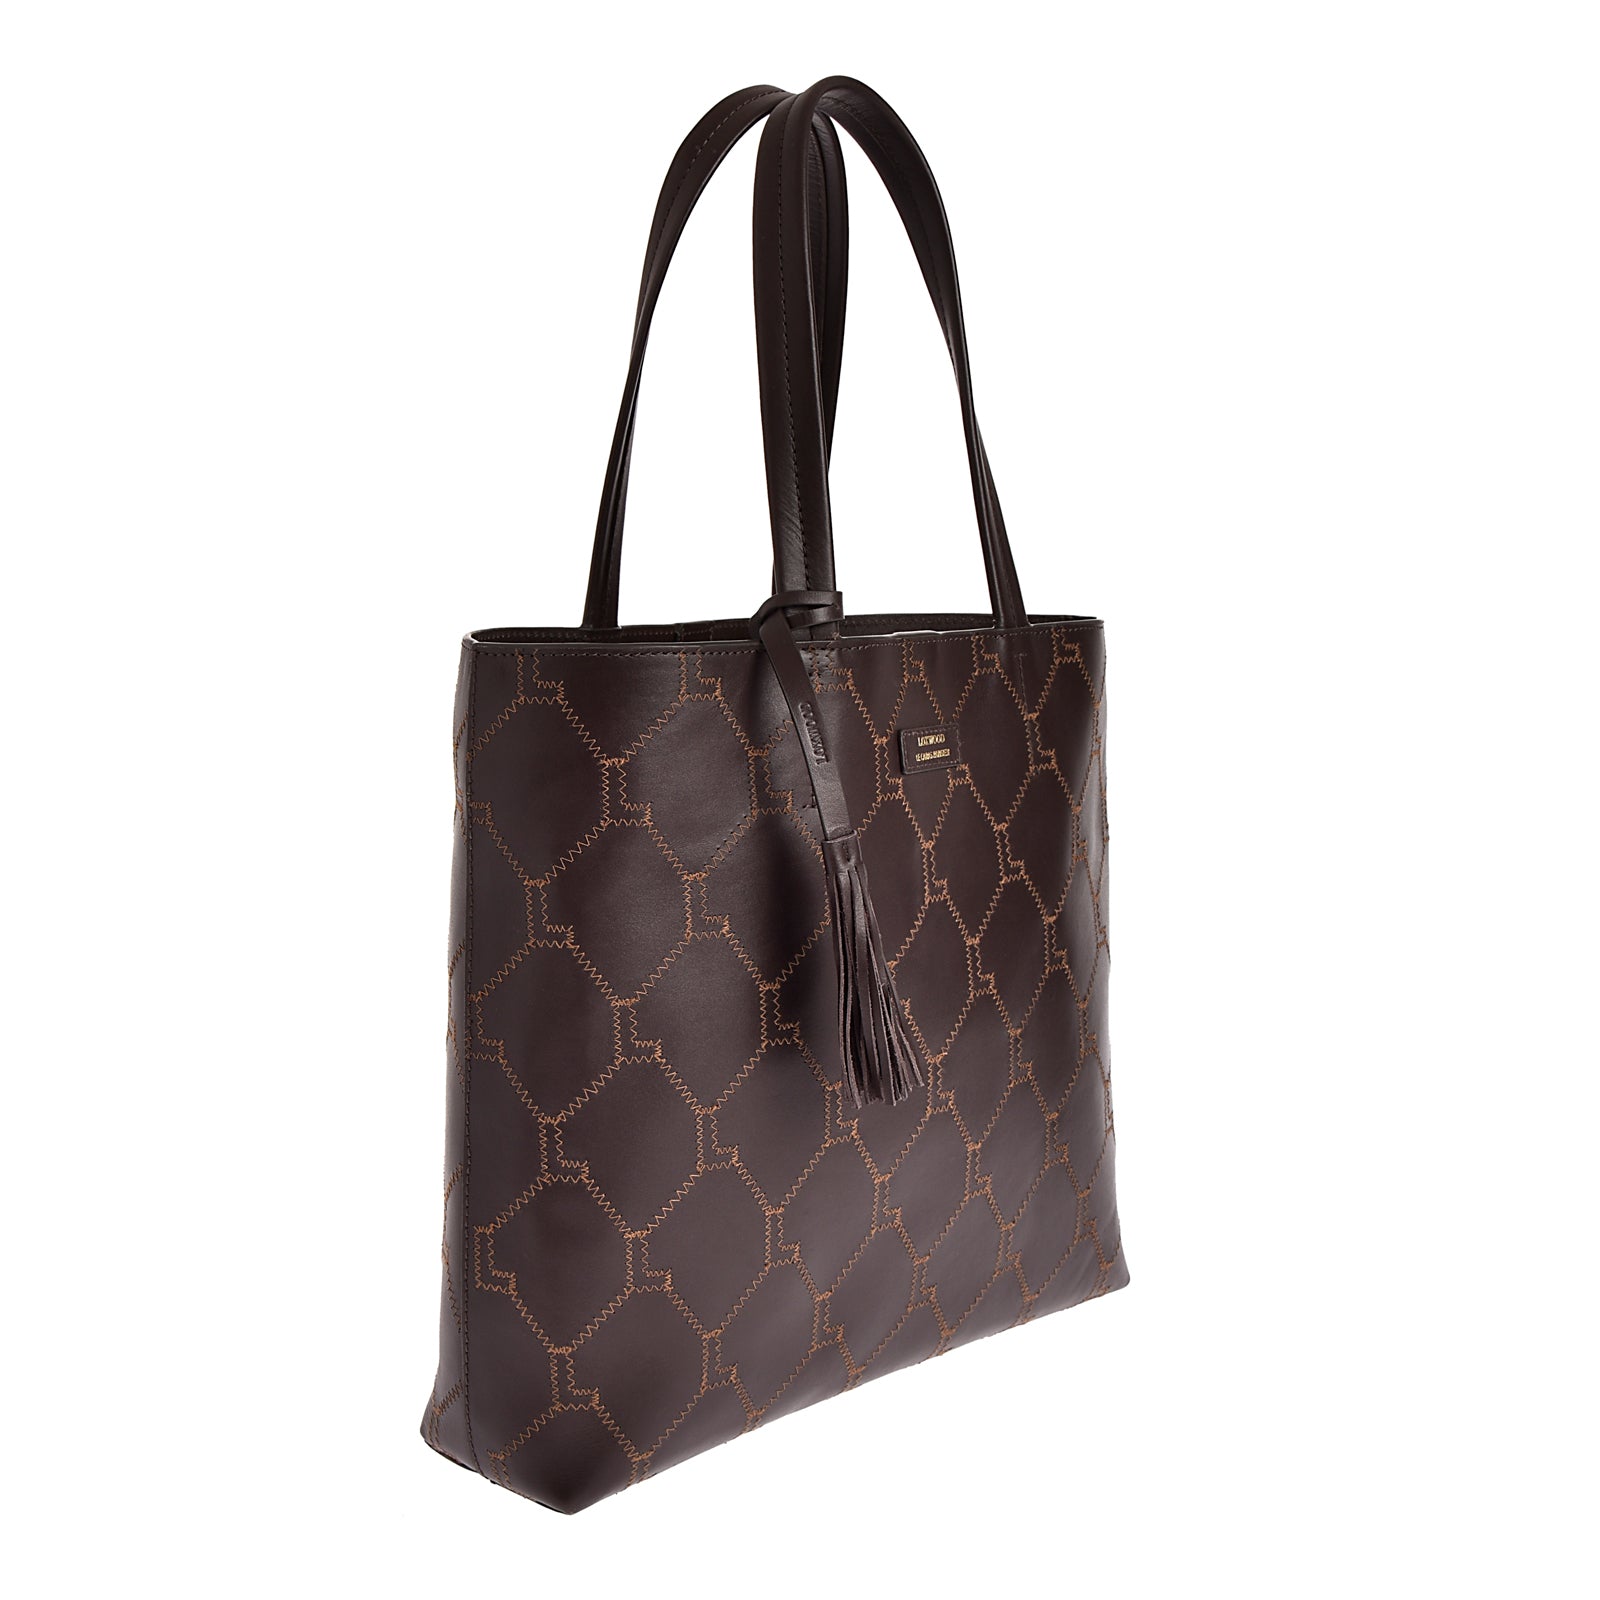 CHARLIE - LARGE SIGNATURE EMBROIDERED LEATHER TOTE